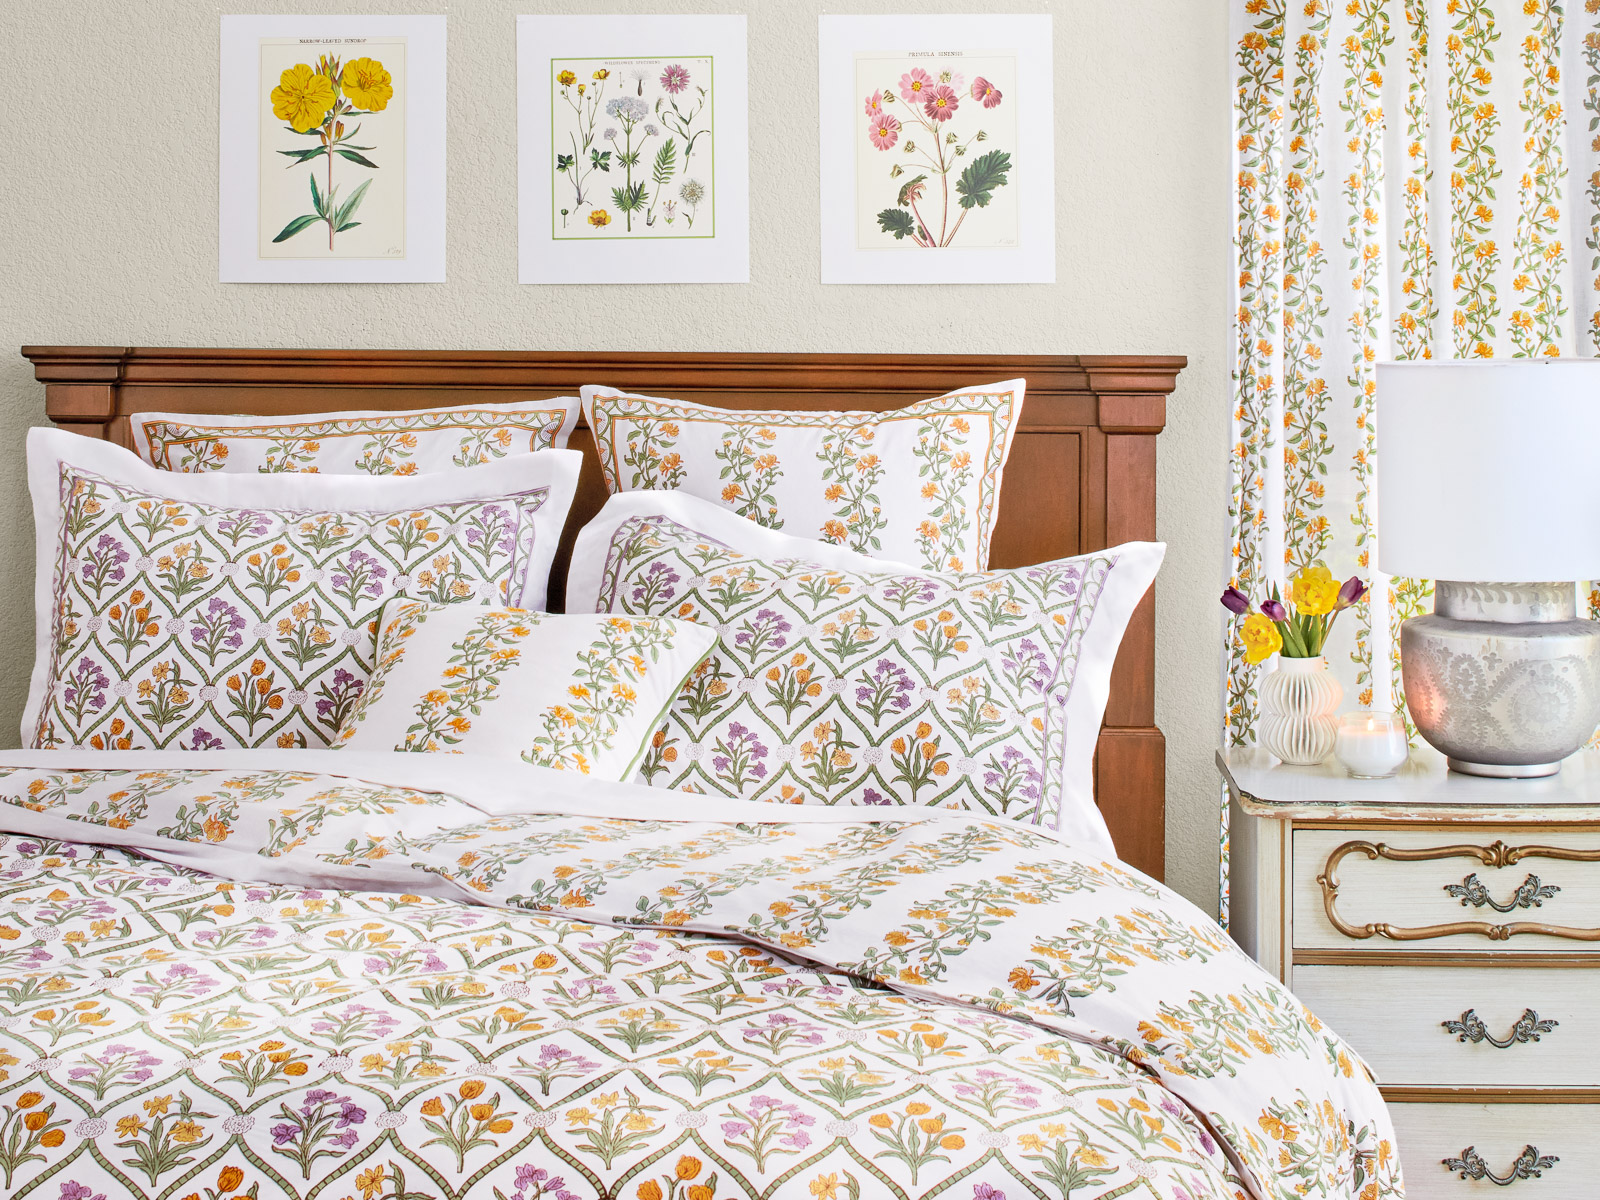 Bedroom with floral print on t he bedding and curtain